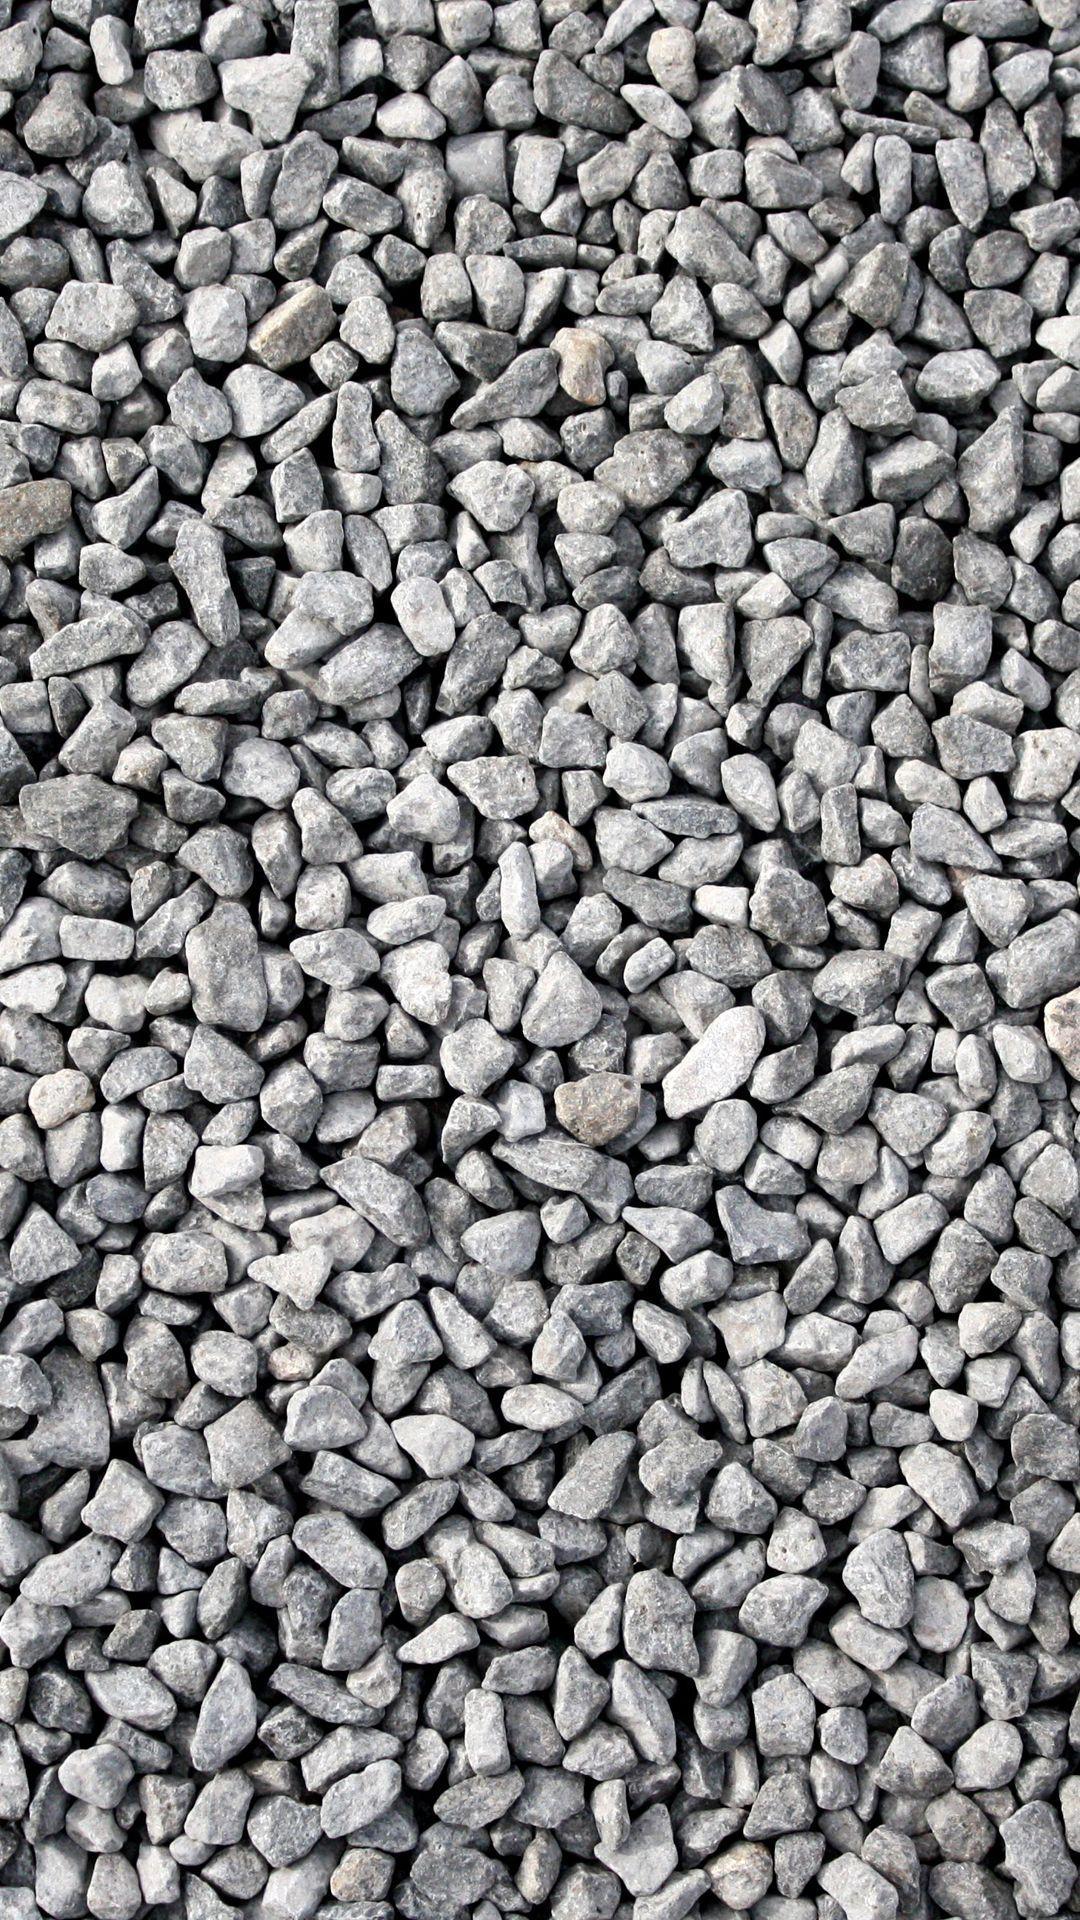 Gravel Rocks Texture Android Wallpaper free download